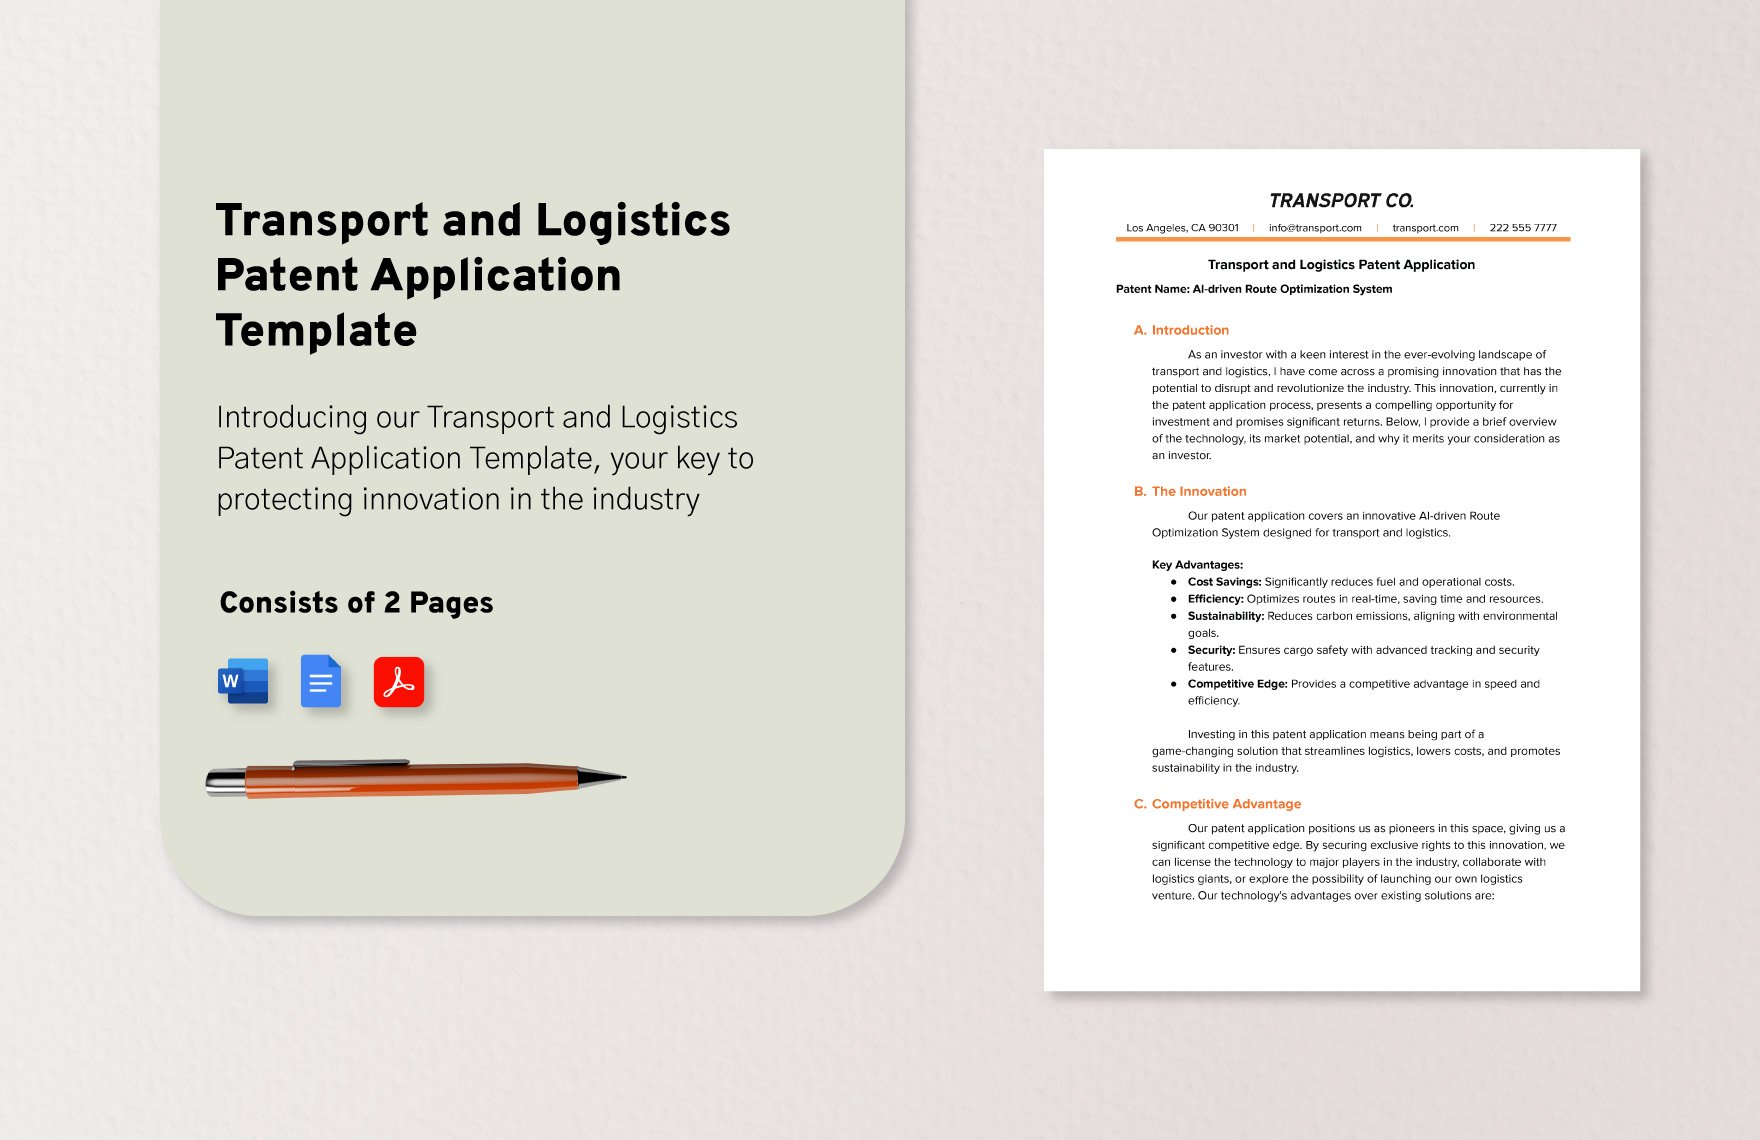 Transport and Logistics Patent Application Template